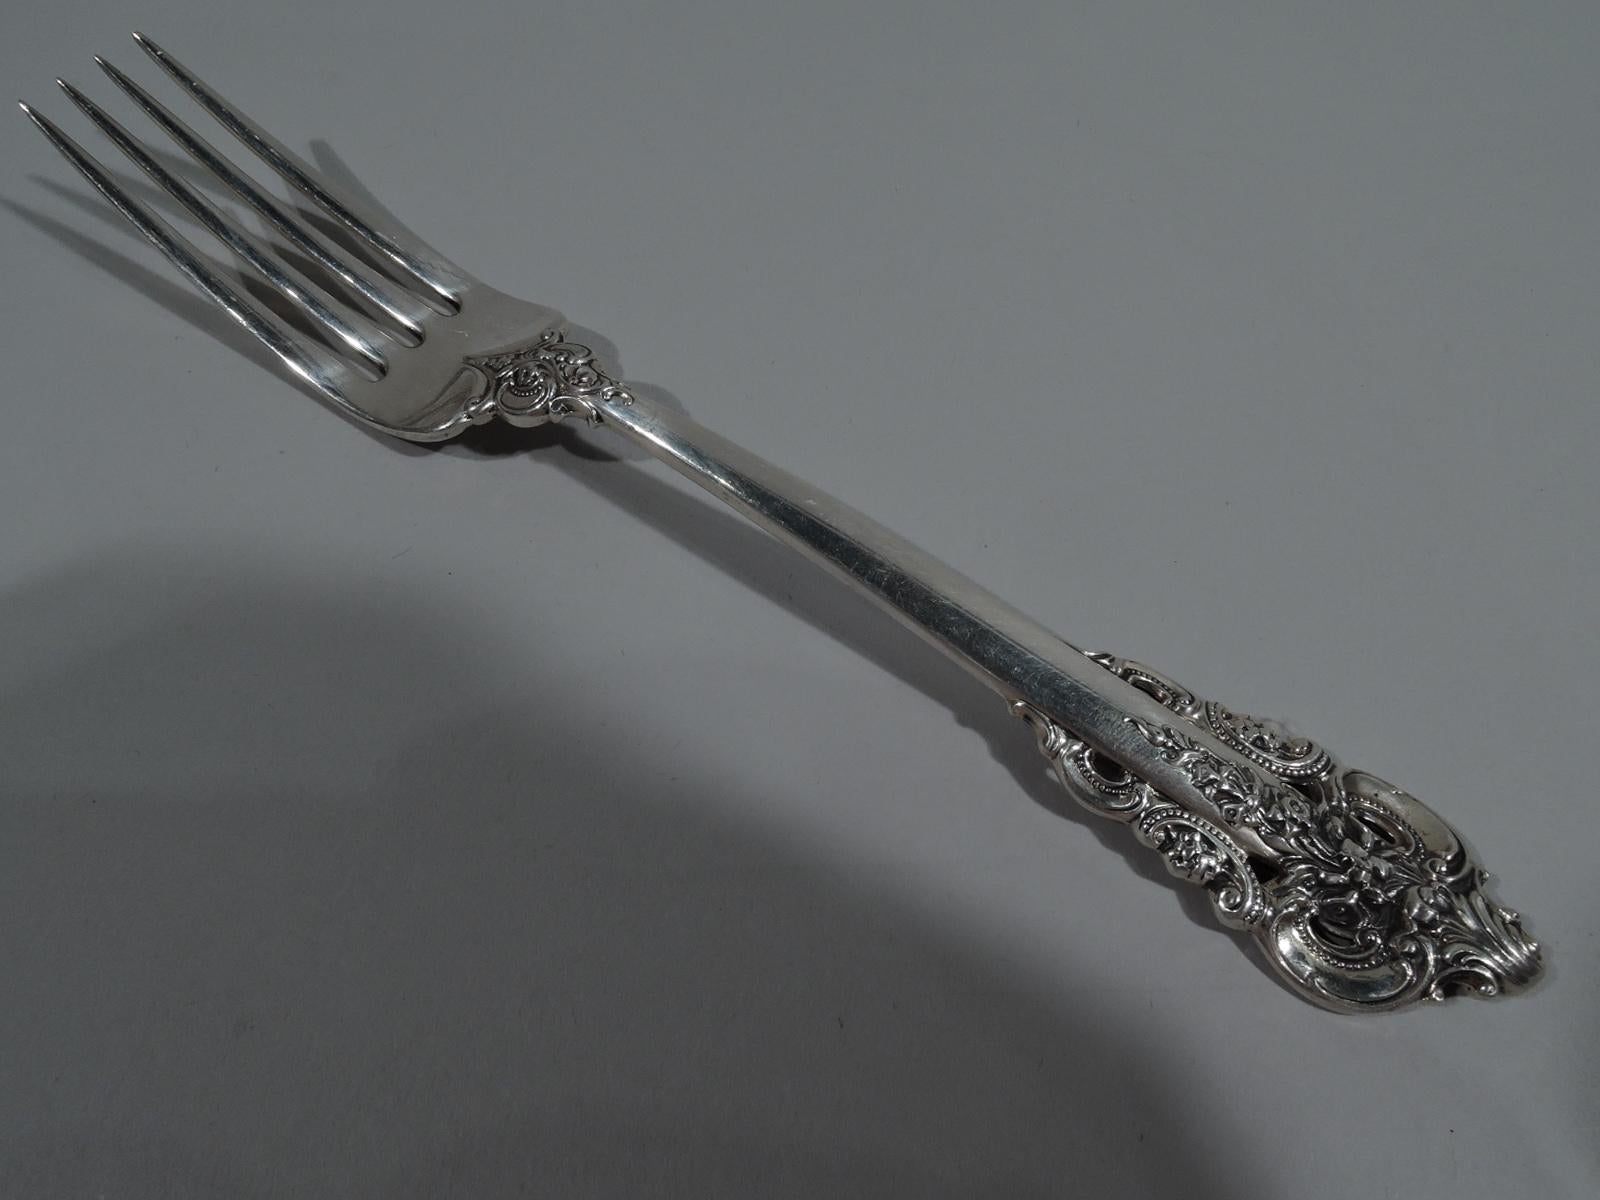 Sterling silver set for 12 in Grande Baroque pattern. Made by Wallace in Wallingford, Conn. This set comprises 52 pieces (dimensions in inches): Forks 12 regular forks (7 1/2) and 12 salad/dessert forks (6 1/2); knives 12 regular knives (9) and 2